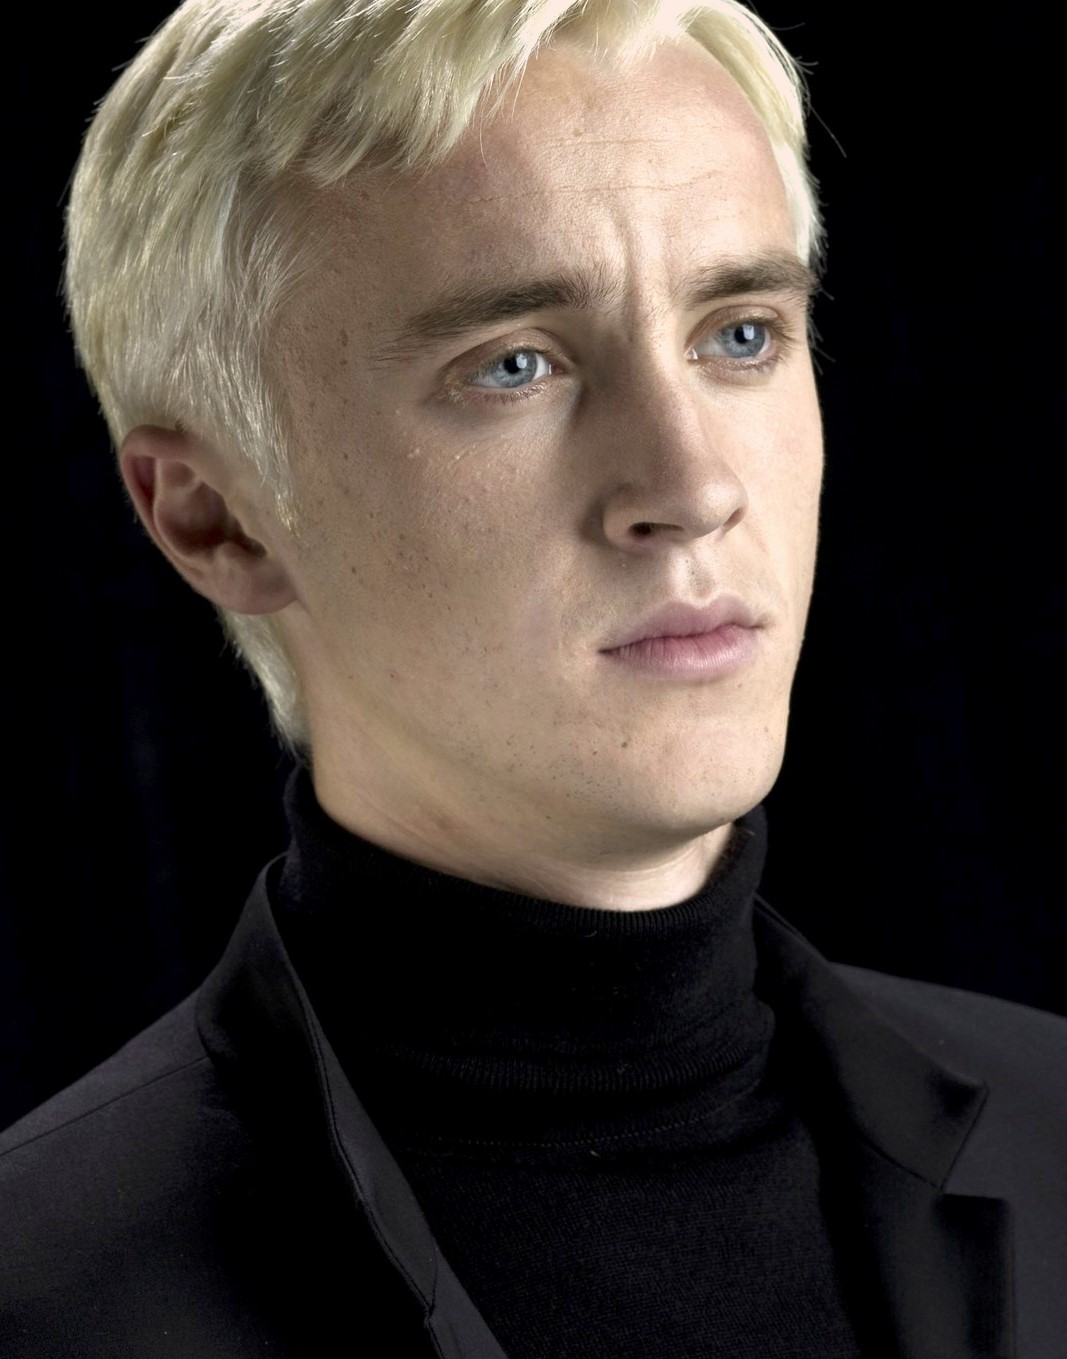 Draco Malfoy is the son of Lucius, and Narcissa Malfoy making him the heir ...